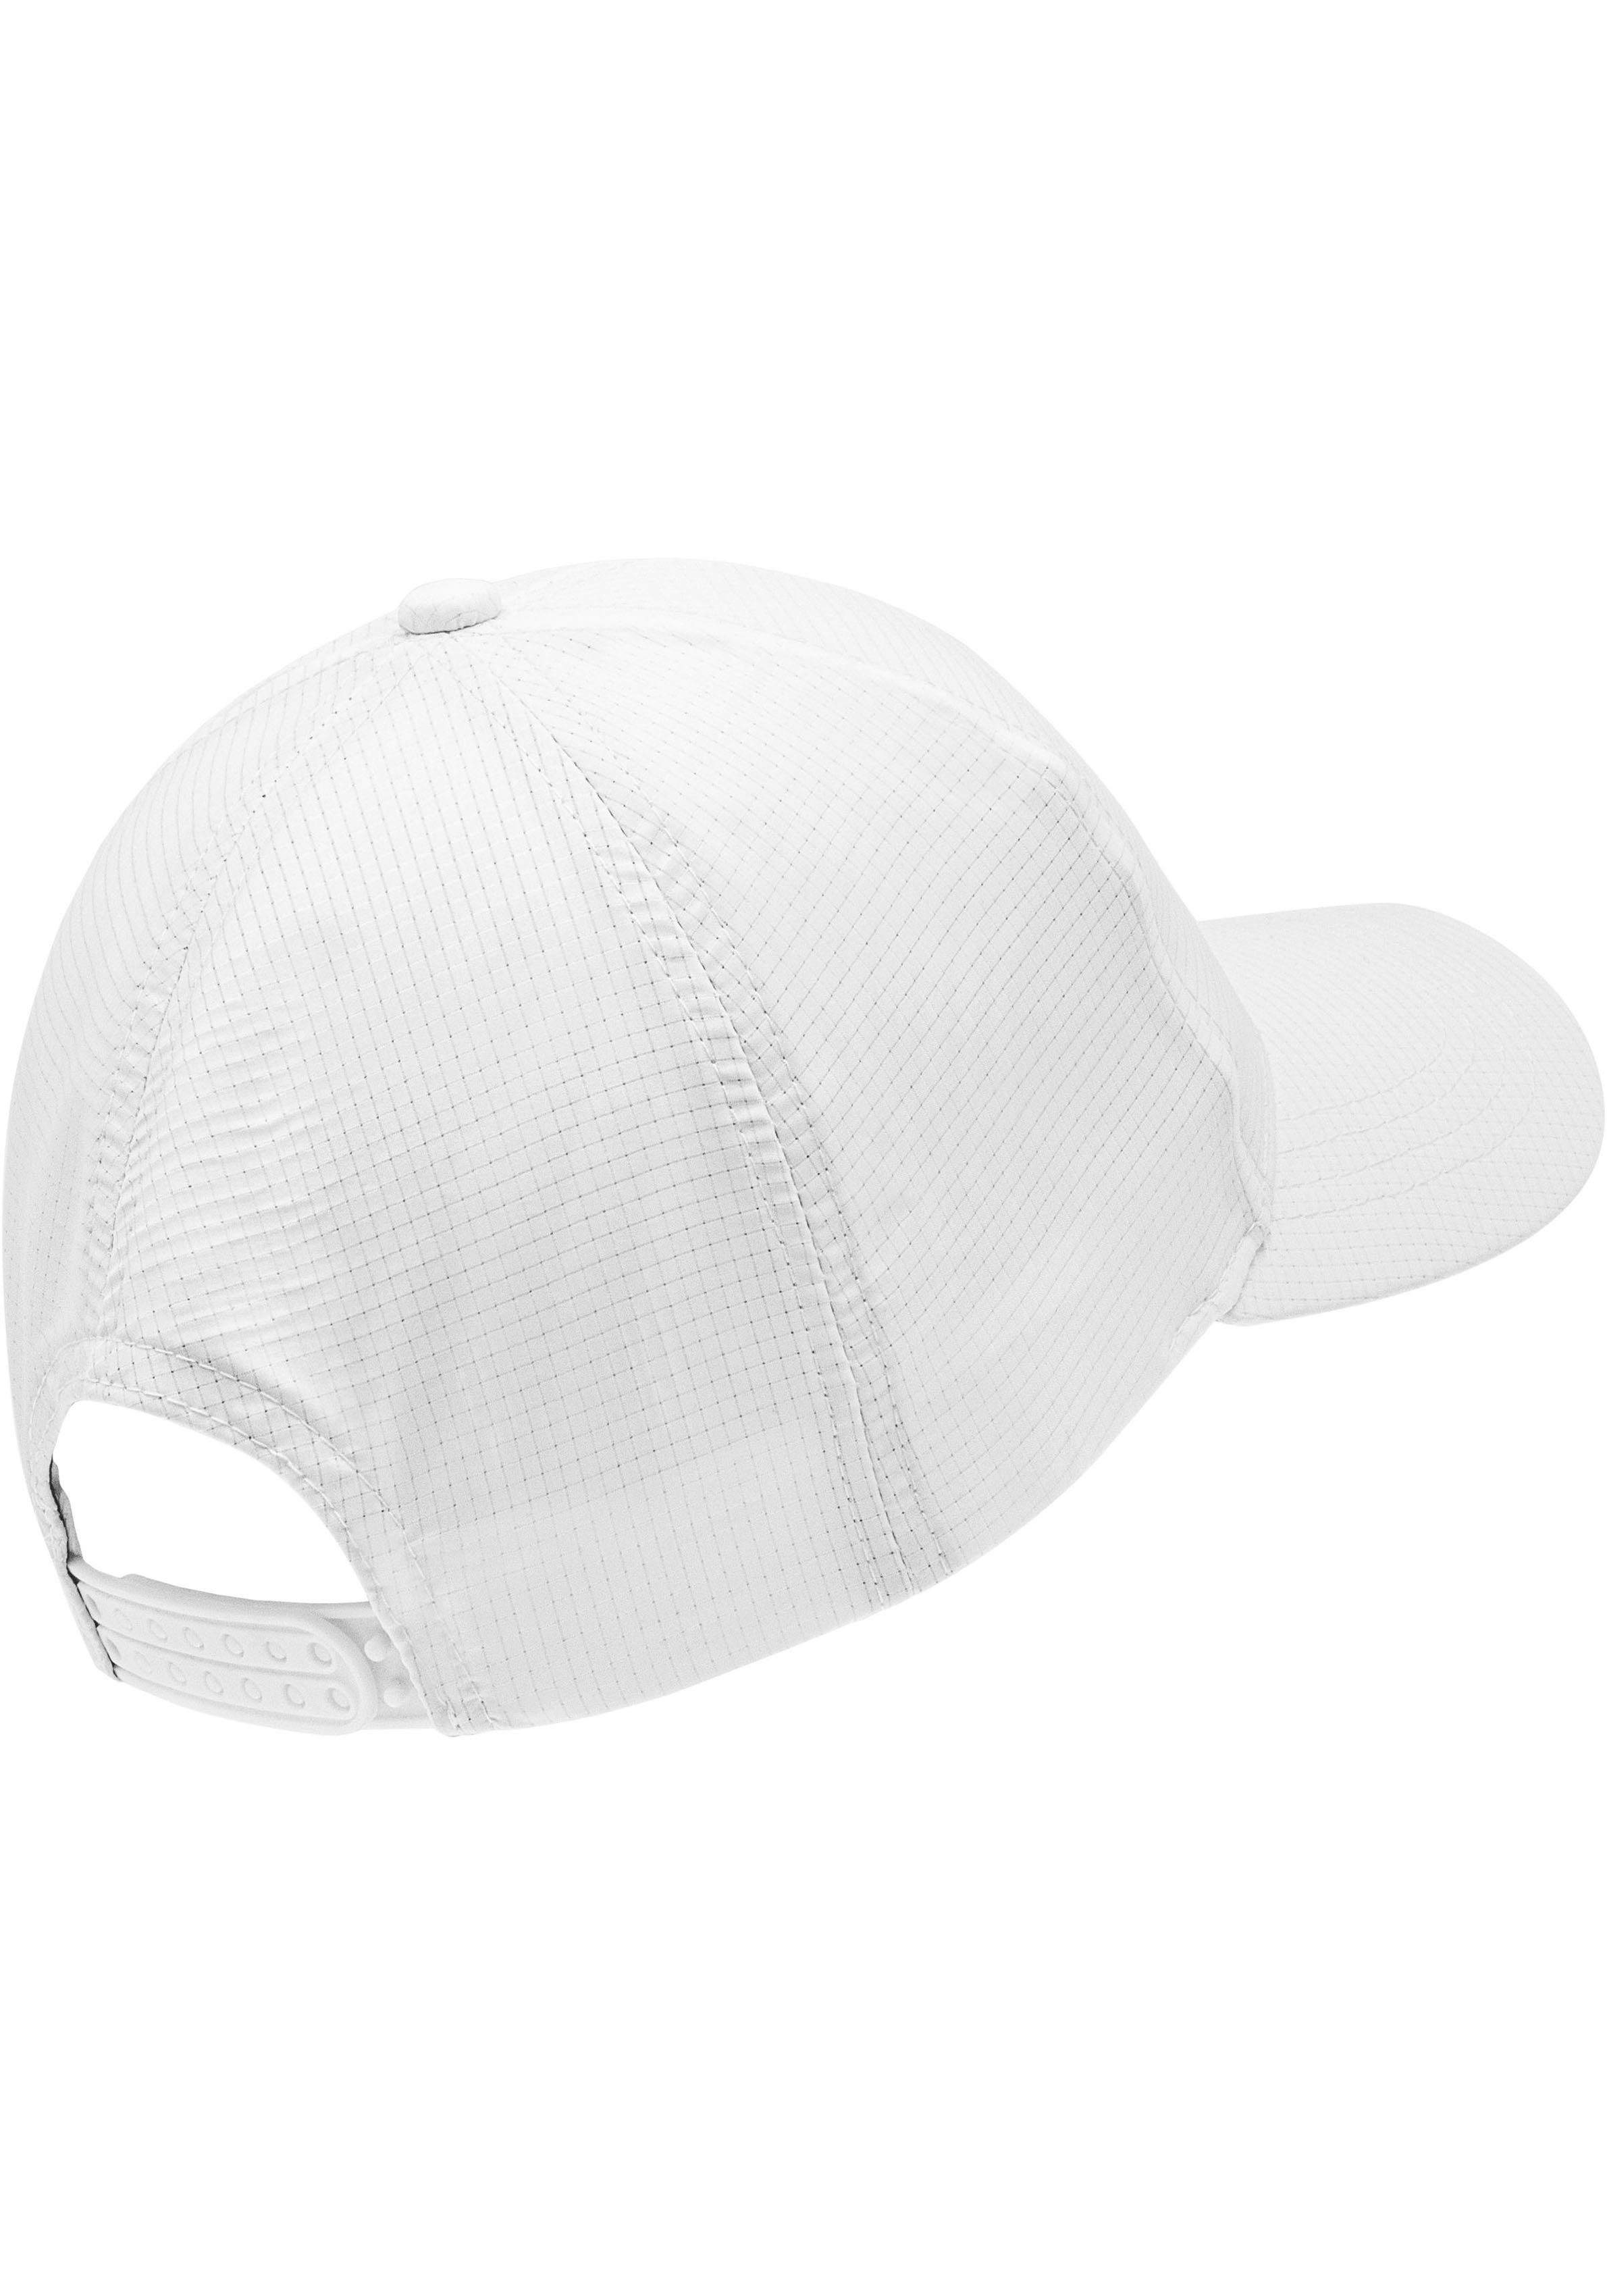 Langley Cap chillouts weiß Hat Baseball